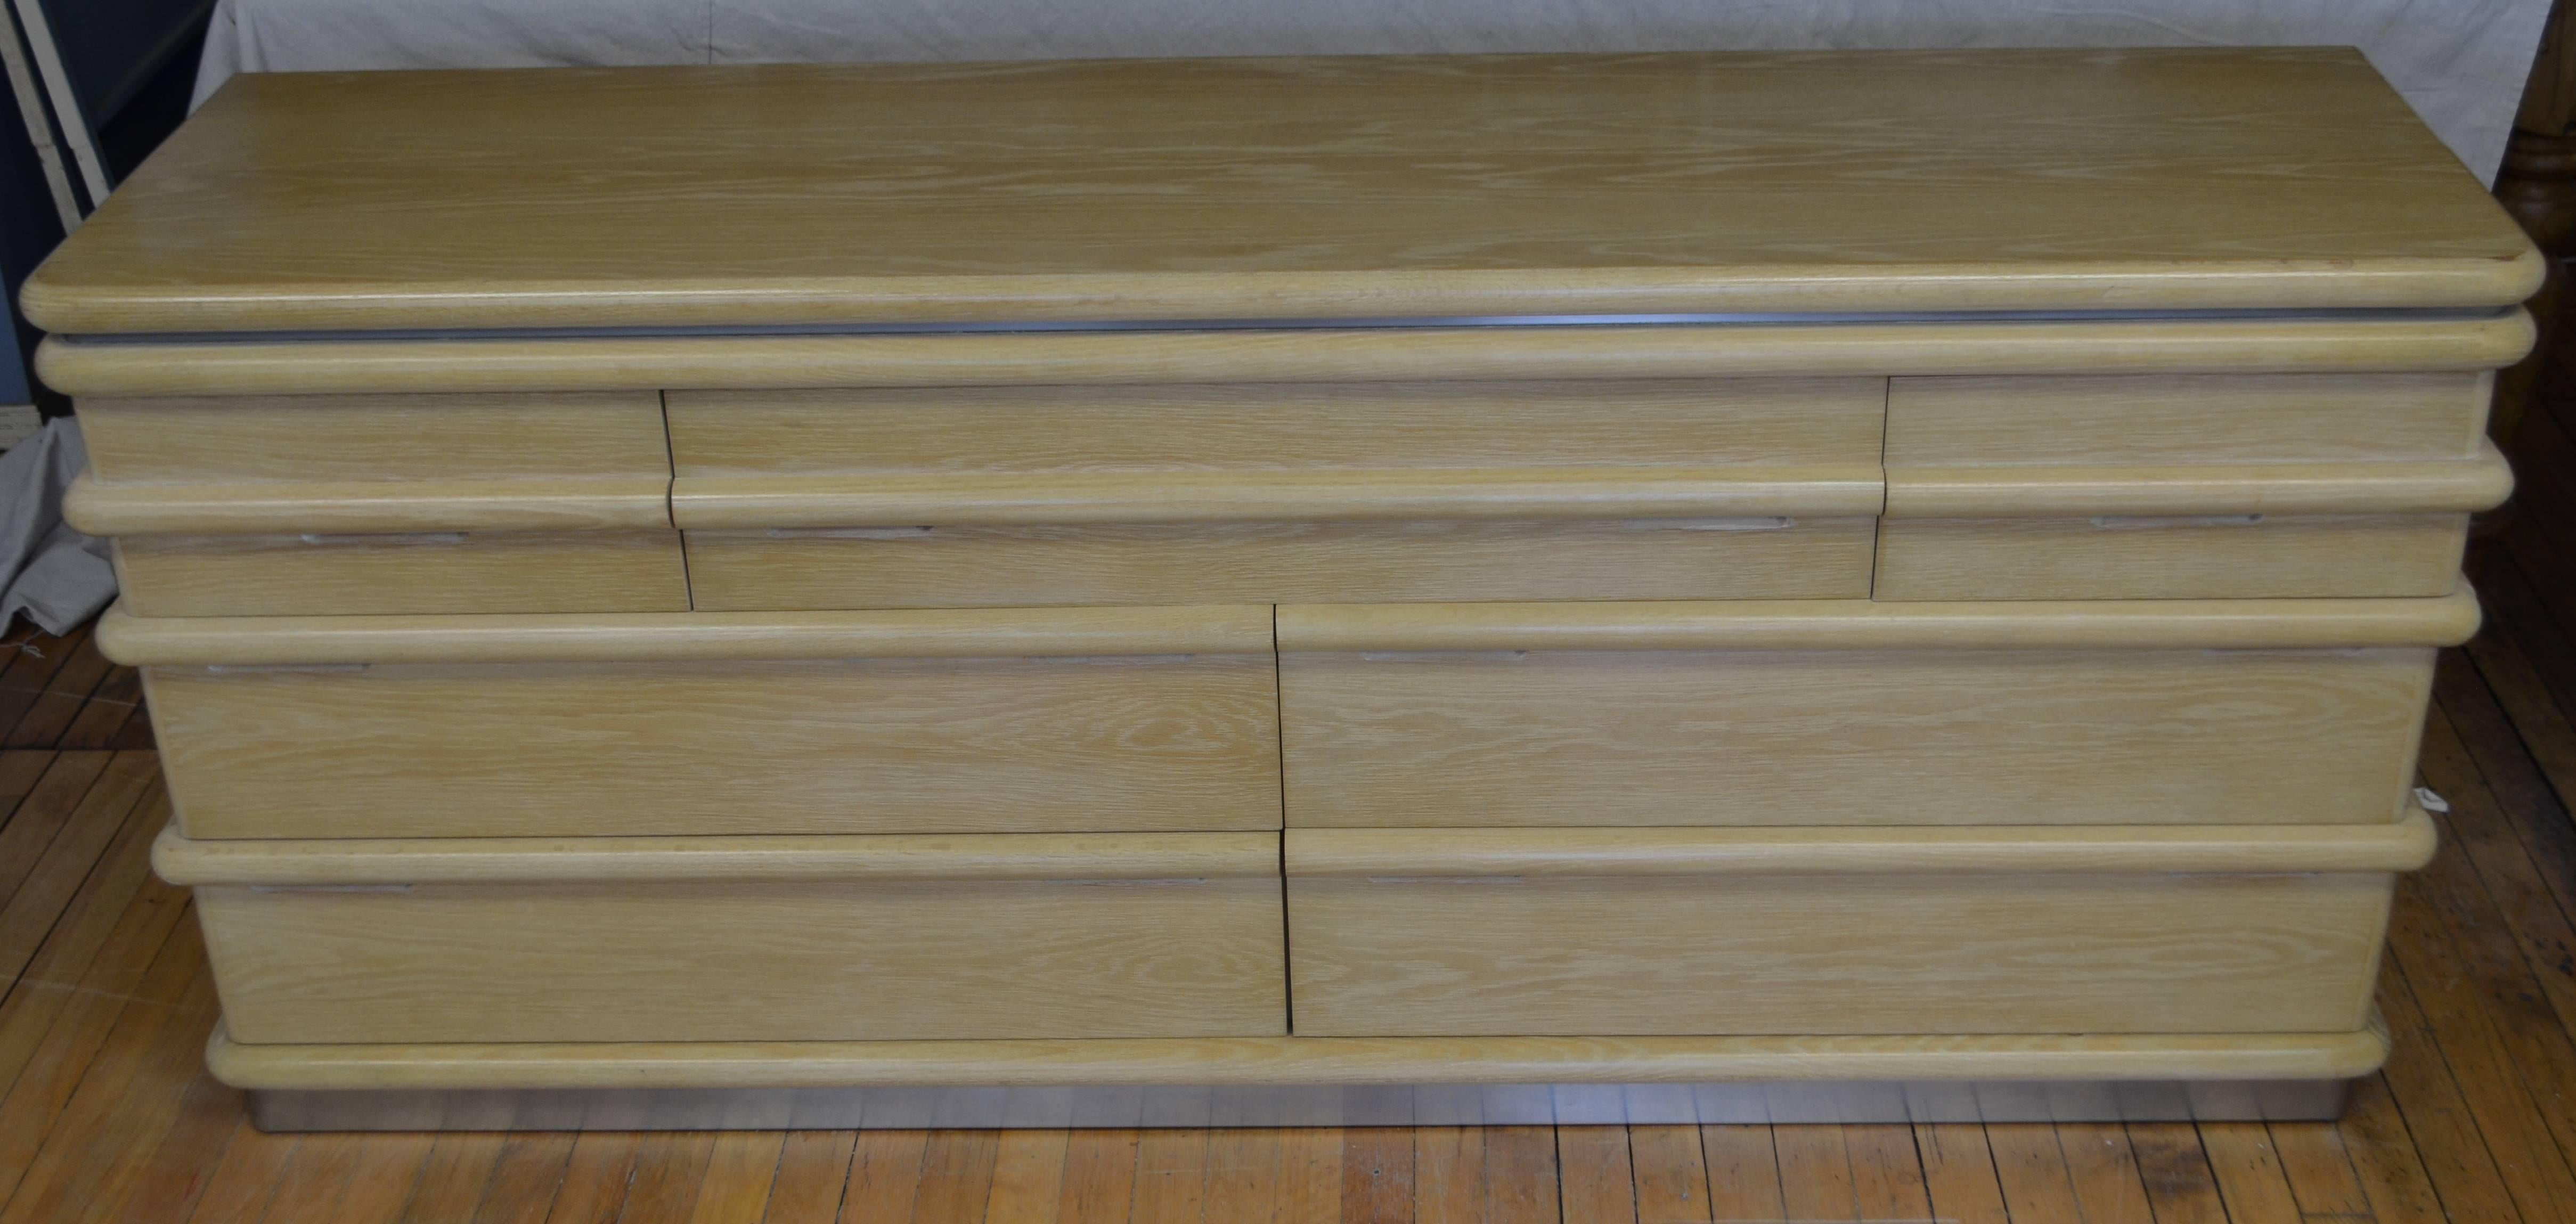 Pair of his and her dressers designed by Jay Spectre for Century Furniture, circa 1970. The dressers are blonde solid oak with dovetail joints, containing seven drawers each. They feature carved rounded borders, wood sculpted, cutout pull handles